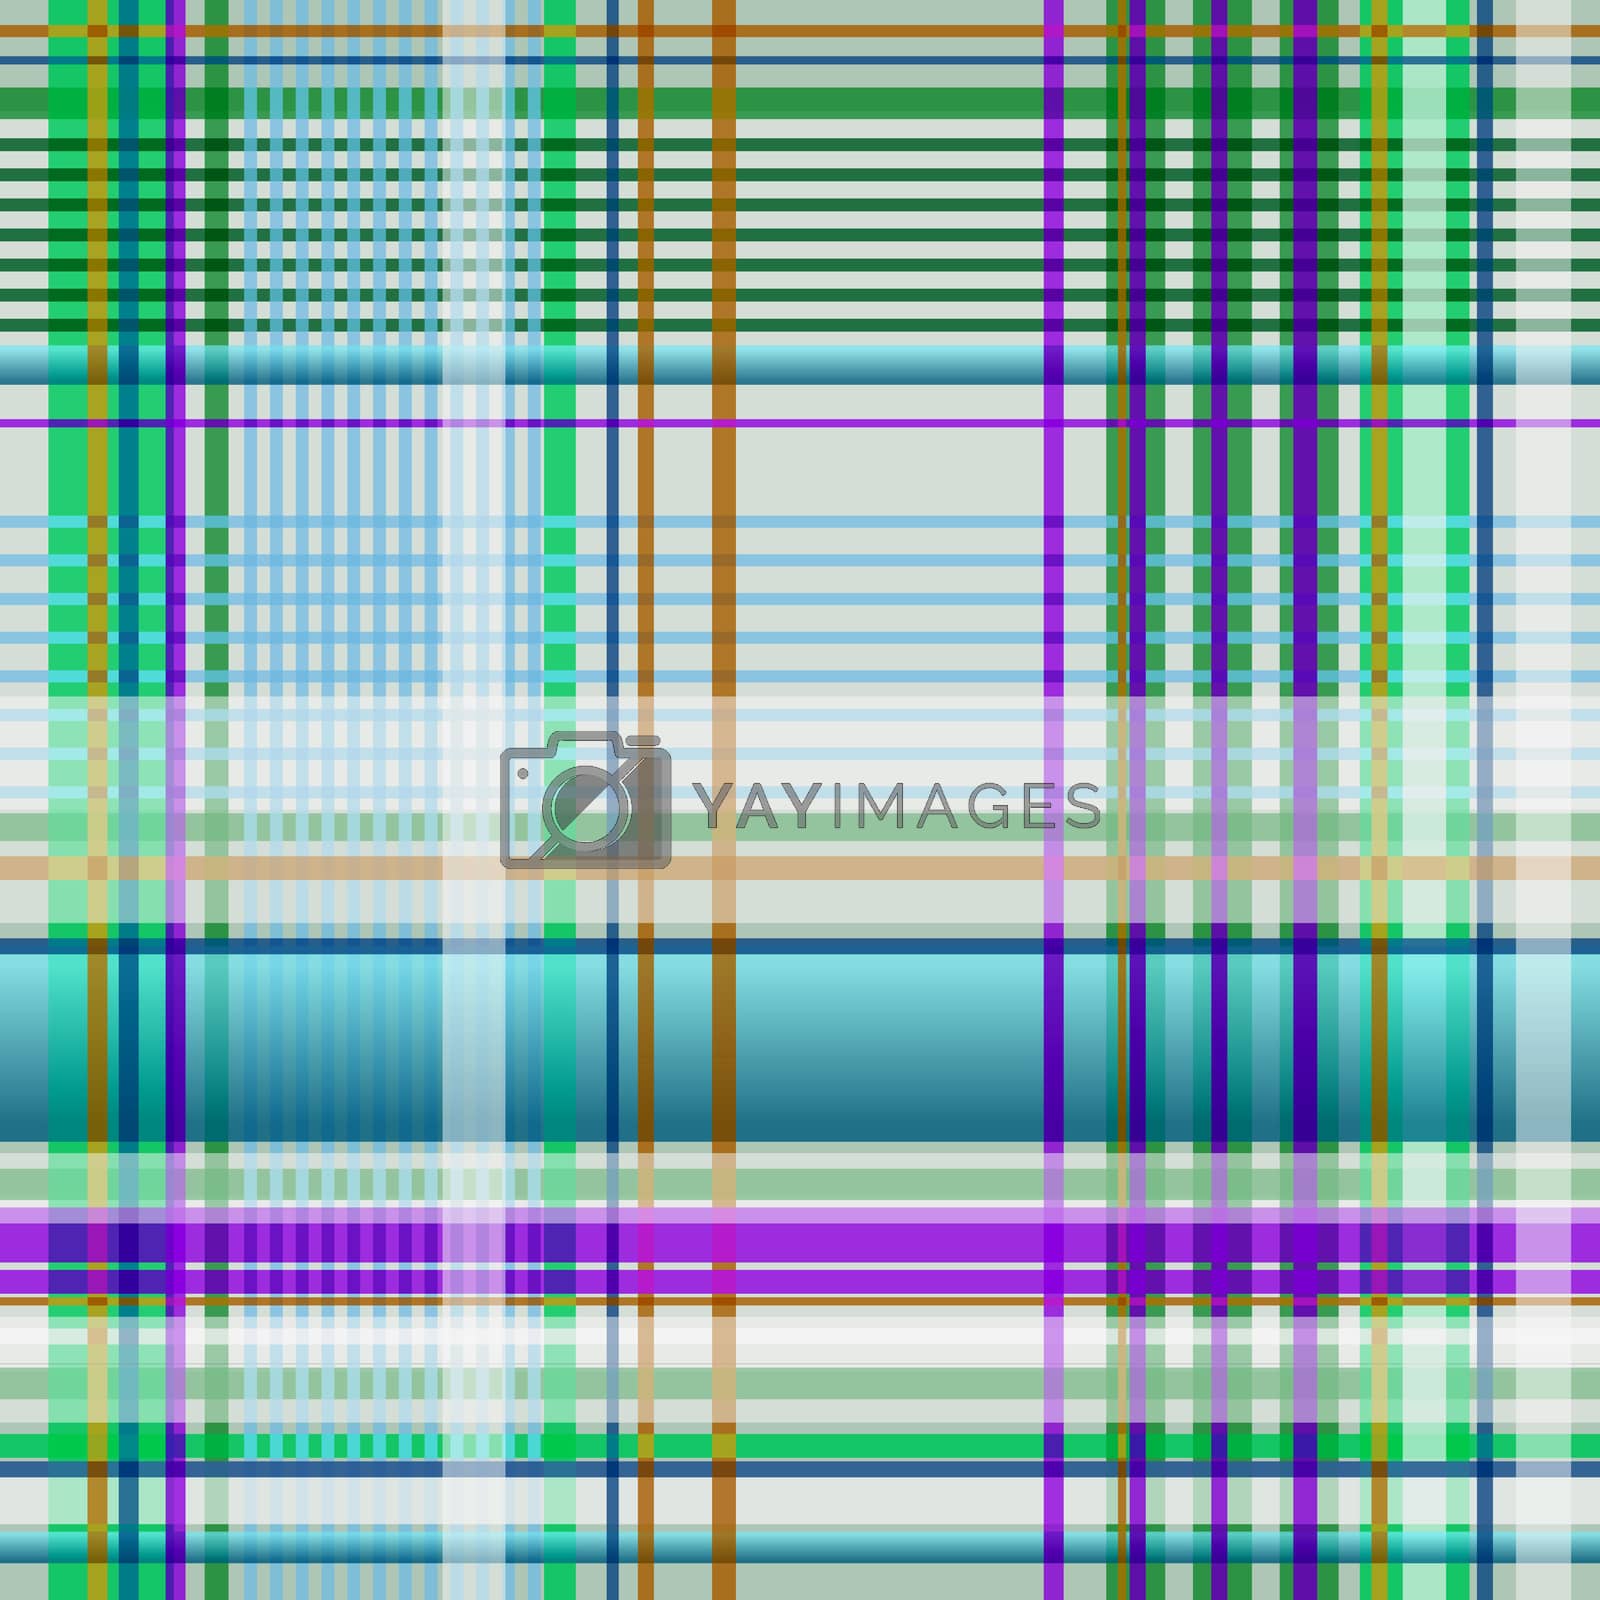 Royalty free image of plaid 13034bt green turquoise by azurin